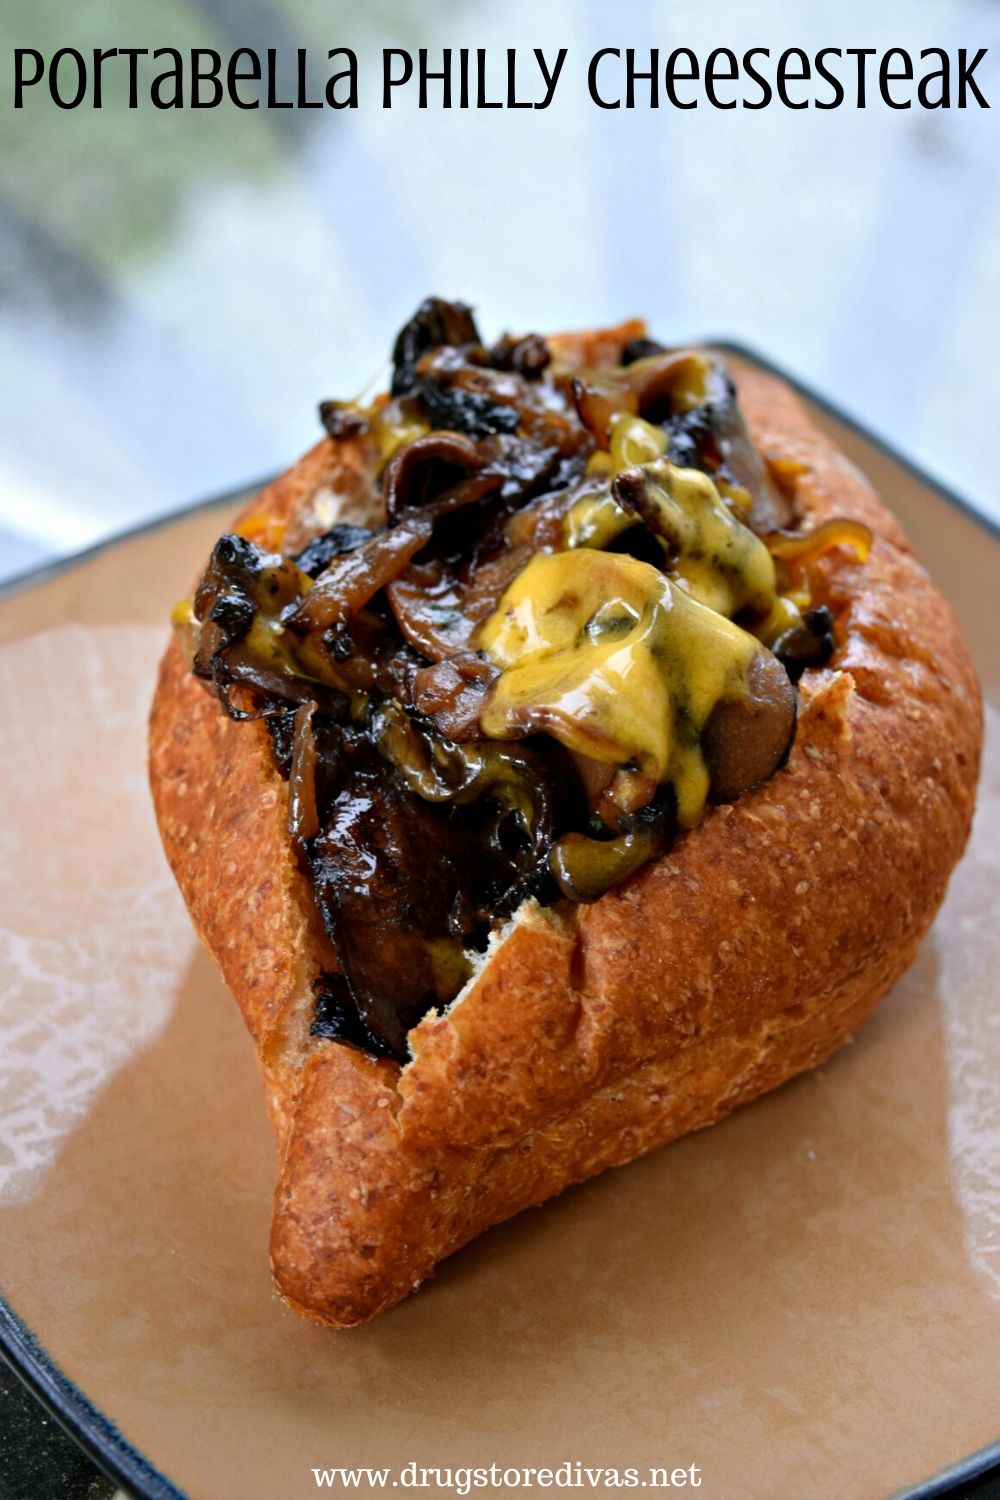 A cheesesteak made with mushrooms in a roll with the words "Portabella Philly Cheesesteak" digitally written on top.